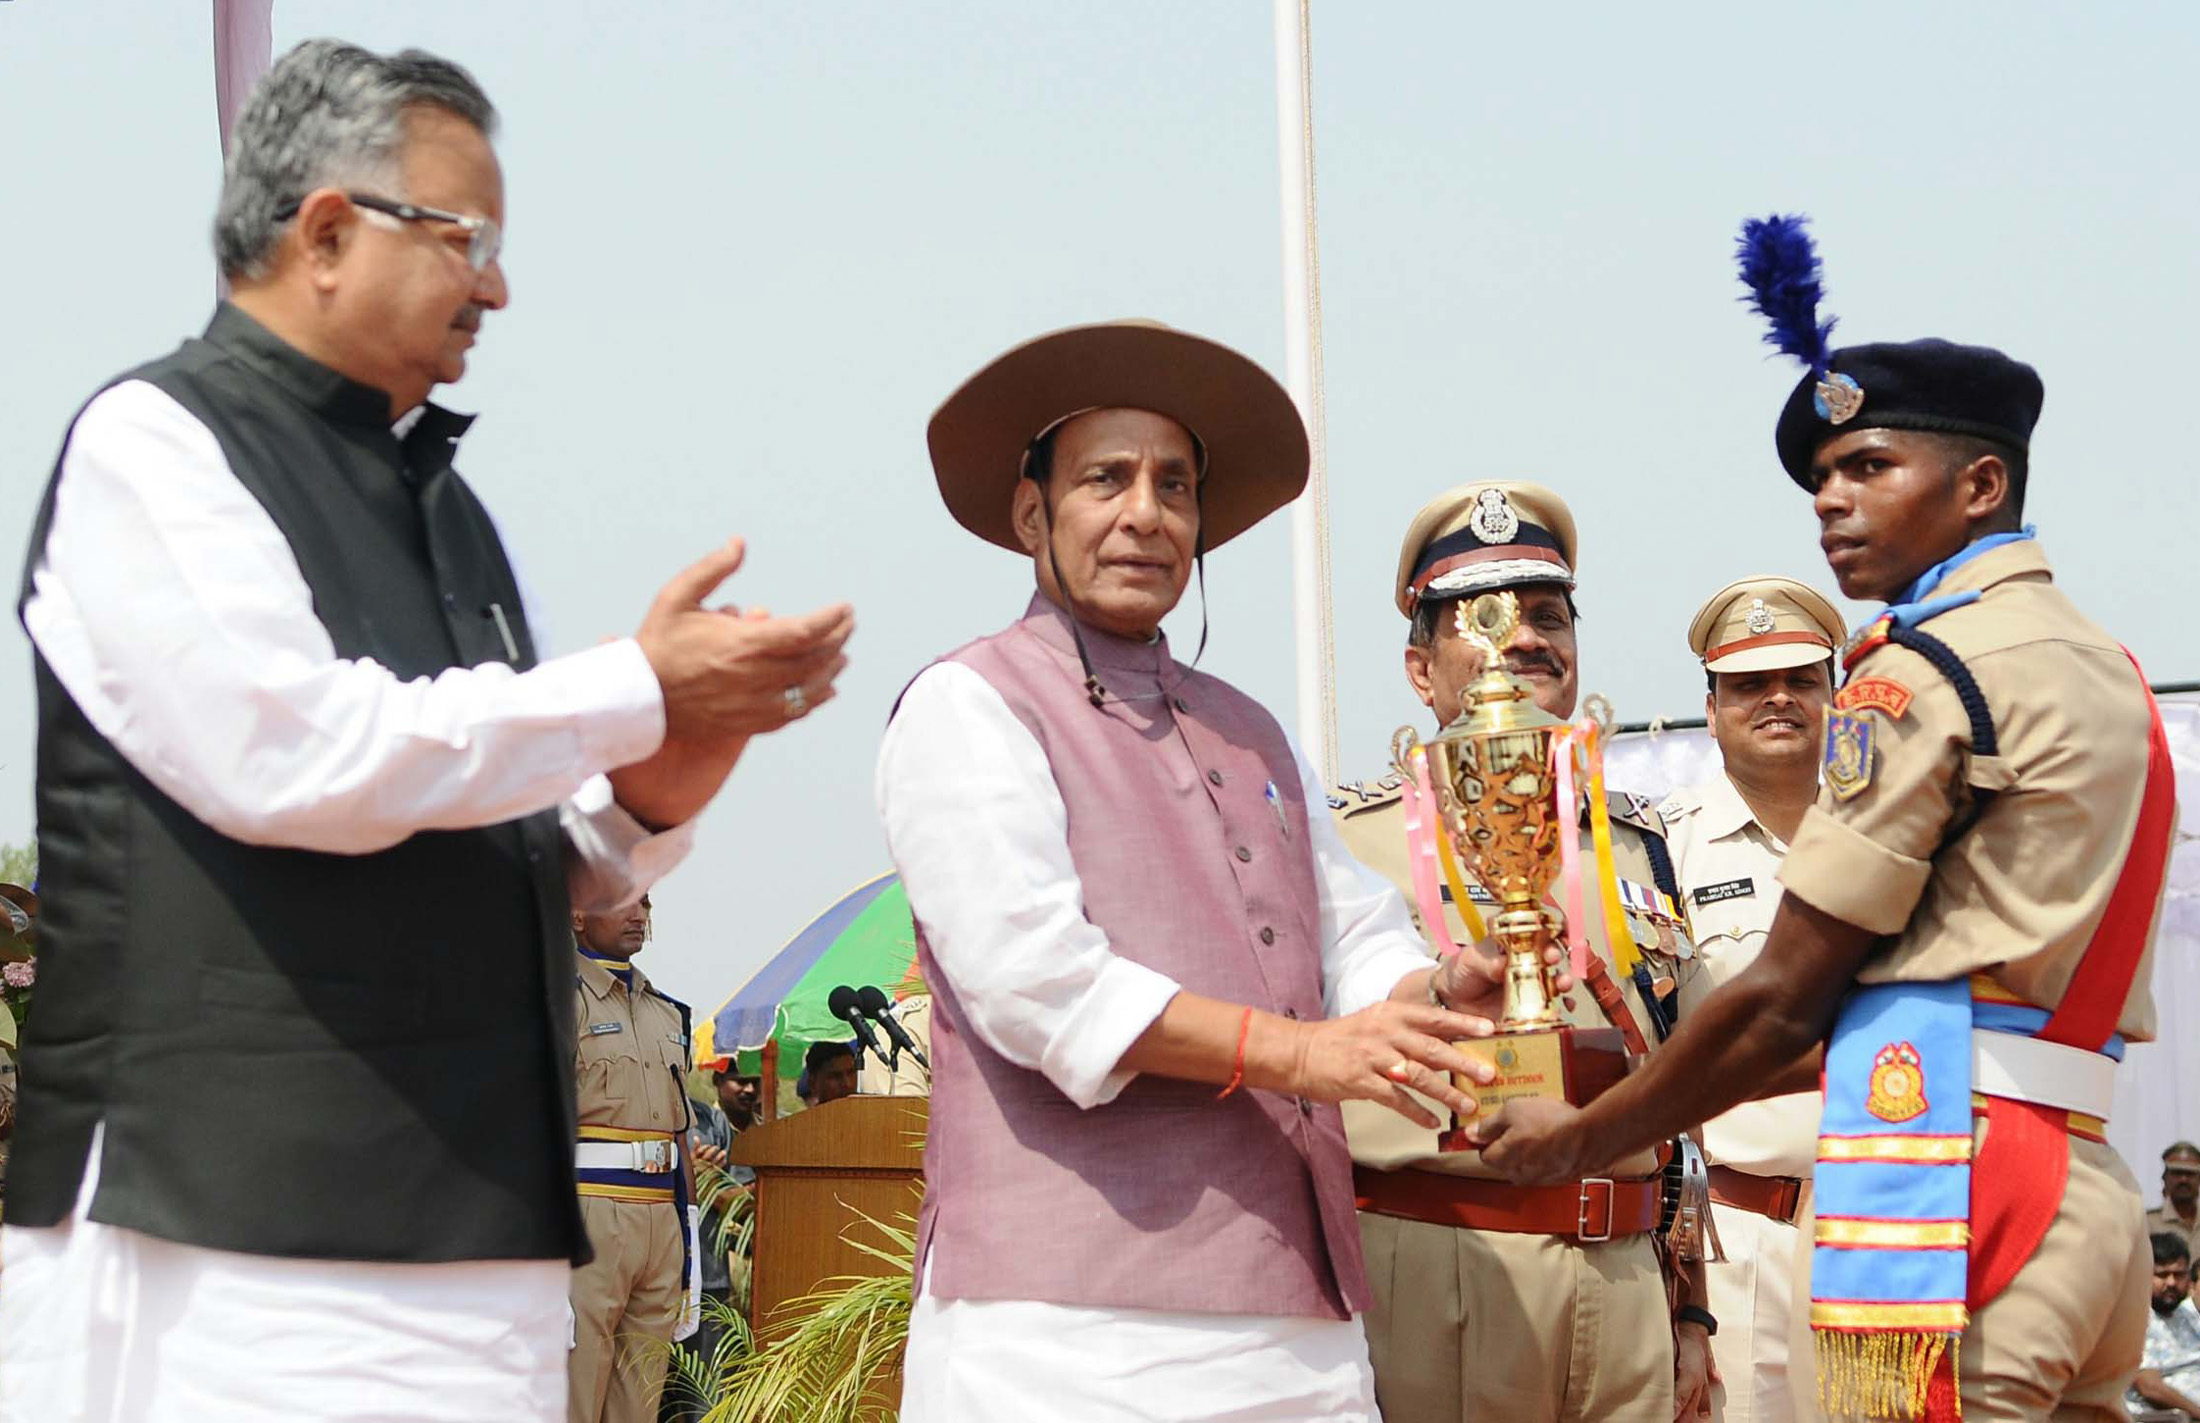 The Union Home Minister, Shri Rajnath Singh presenting the trophies, on the occasion of the Passing Out Parade of the Bastariya Battalion of CRPF, at Ambikapur, in Chhattisgarh on May 21, 2018.  	The Chief Minister of Chhattisgarh, Dr. Raman Singh is also seen.